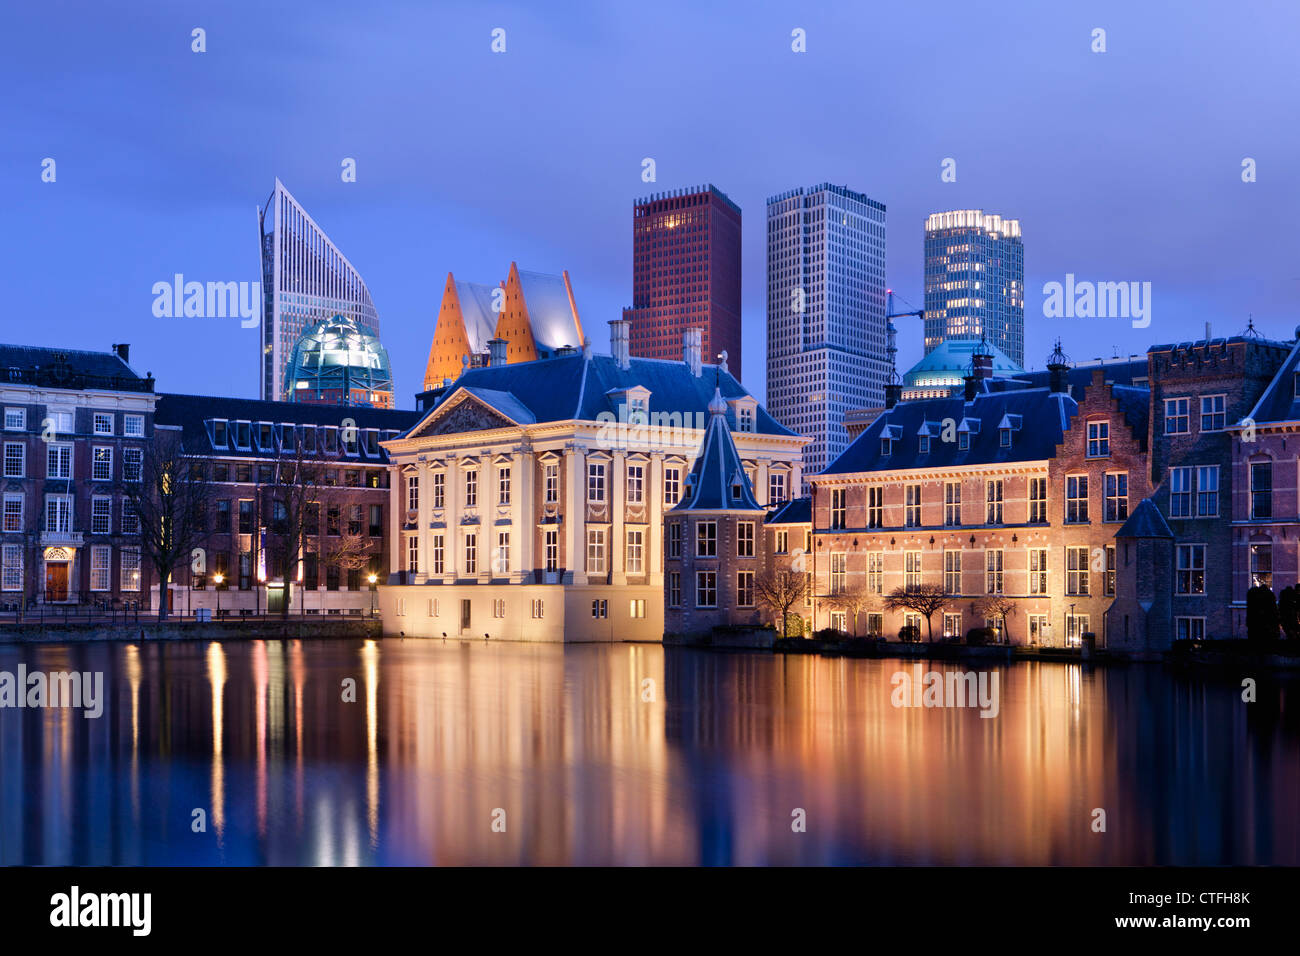 Netherlands, Group of buildings called Binnenhof, center of Dutch politics. In the middle museum called Mauritshuis. Dusk. Stock Photo